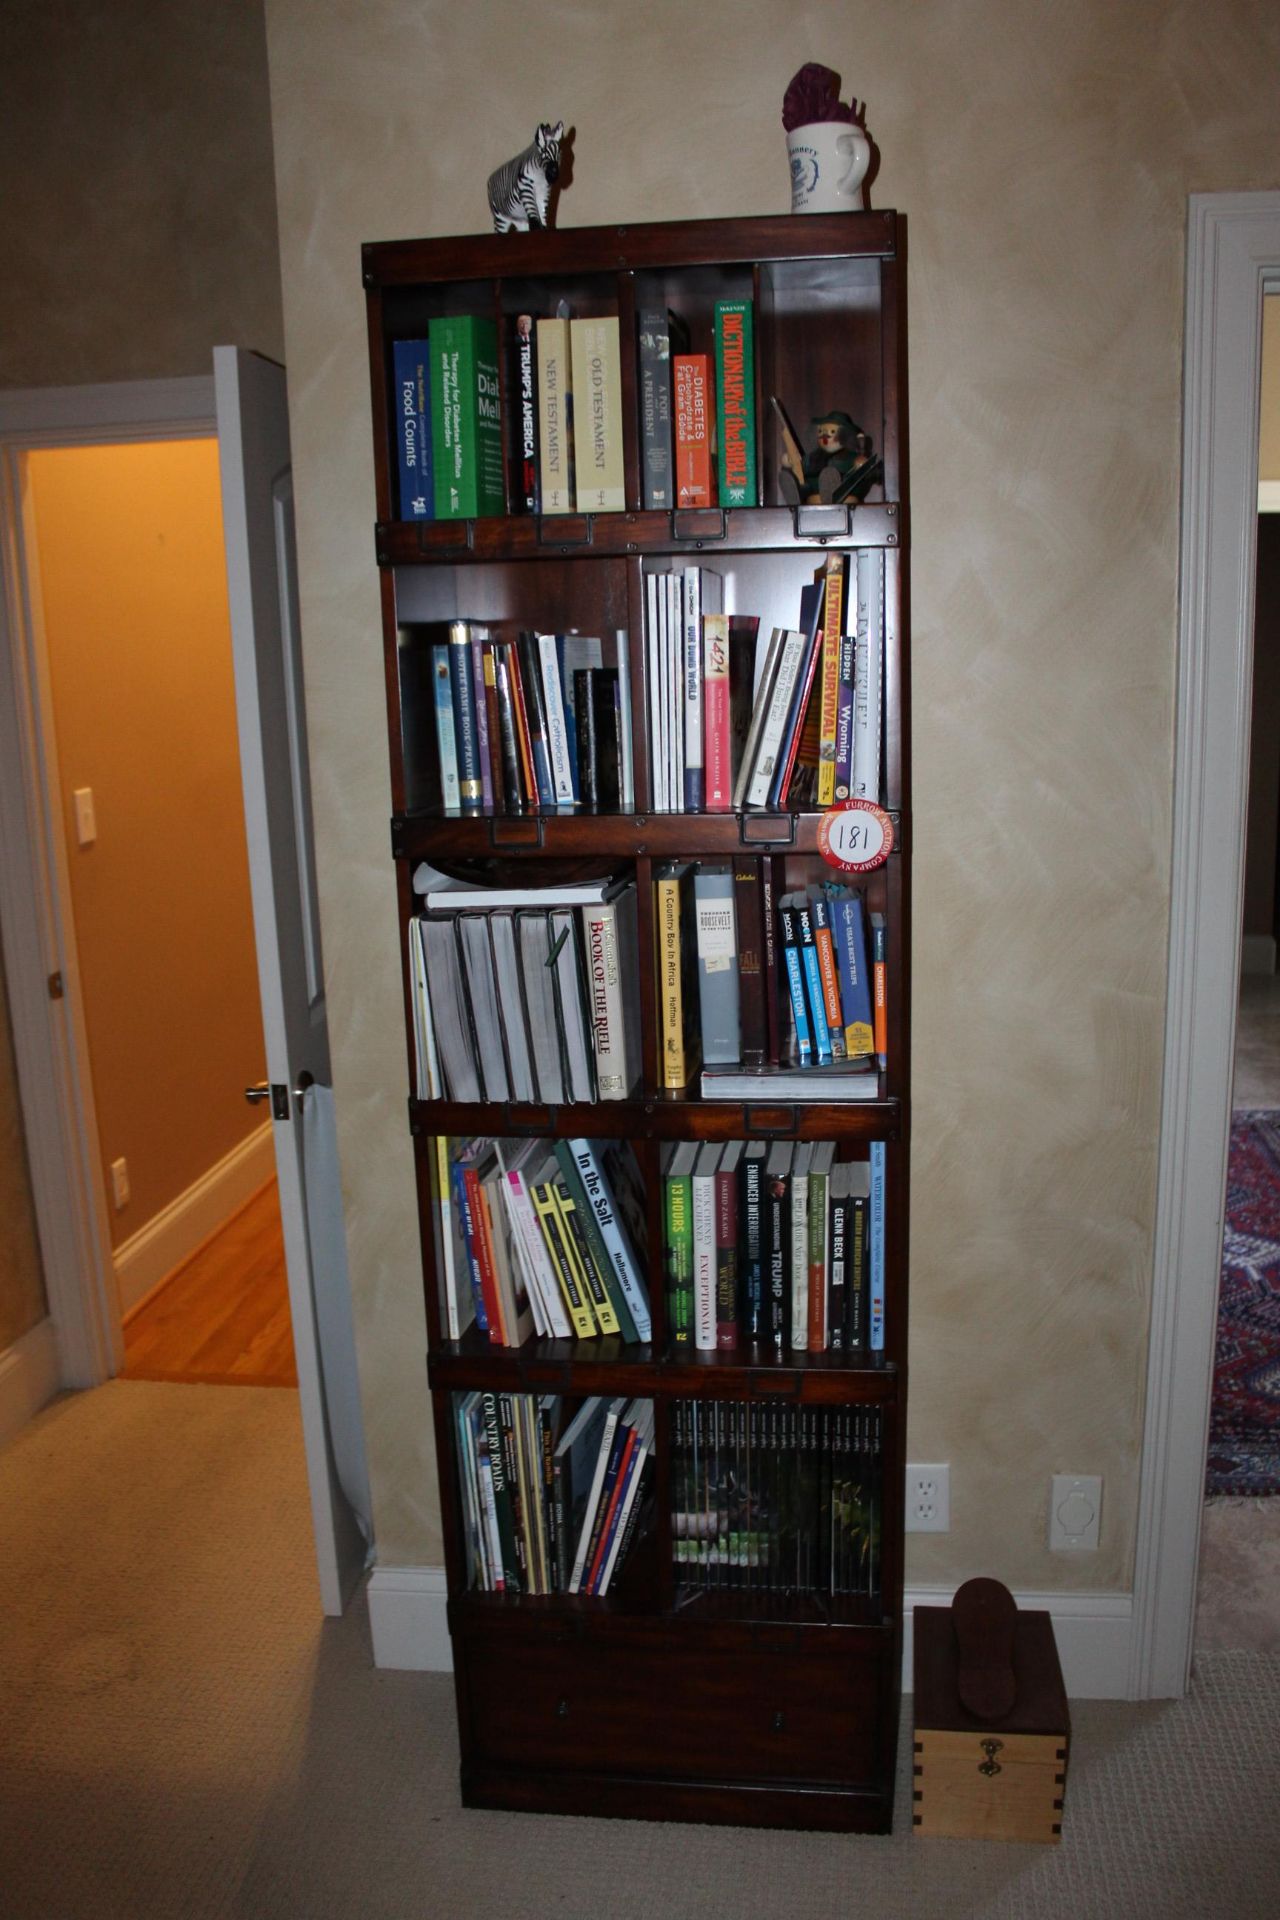 5 Shelf Bookcase with one Drawer, Dark Cherry/Mahogany Finish, includes Contents, Hunting Books,